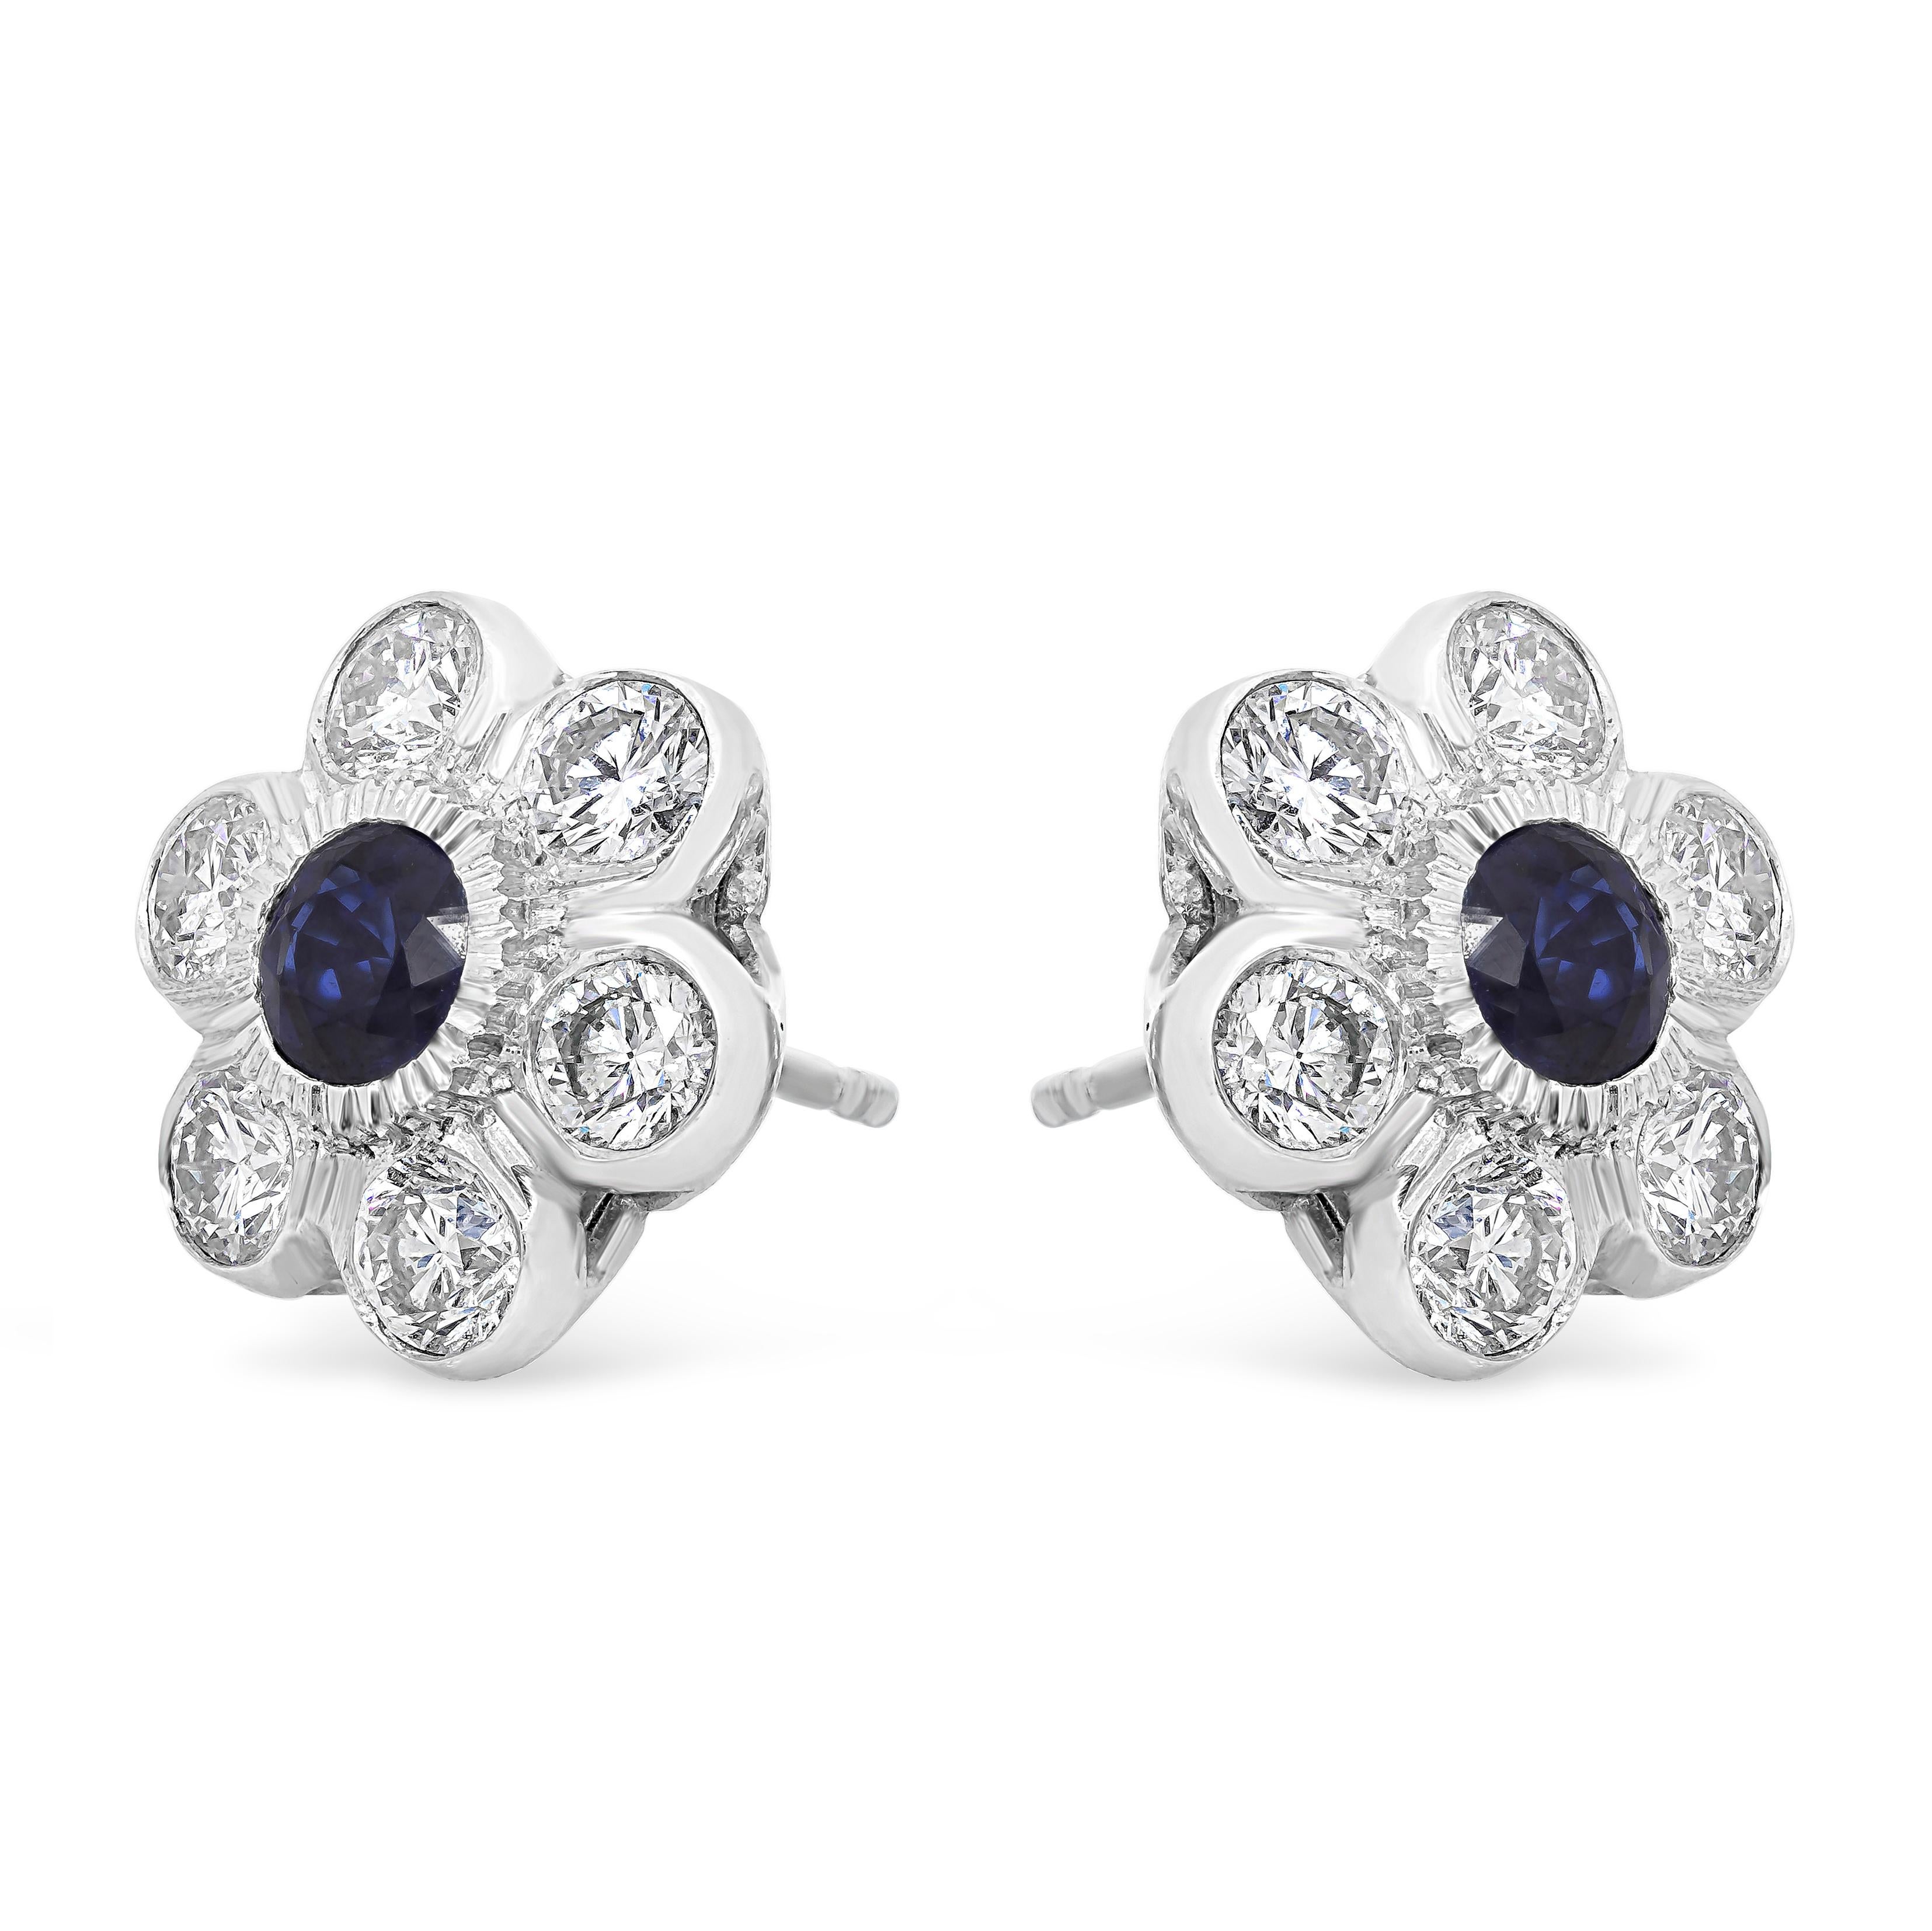 Contemporary Roman Malakov 1.33 Carats Total Round Blue Sapphire and Diamond Stud Earrings For Sale